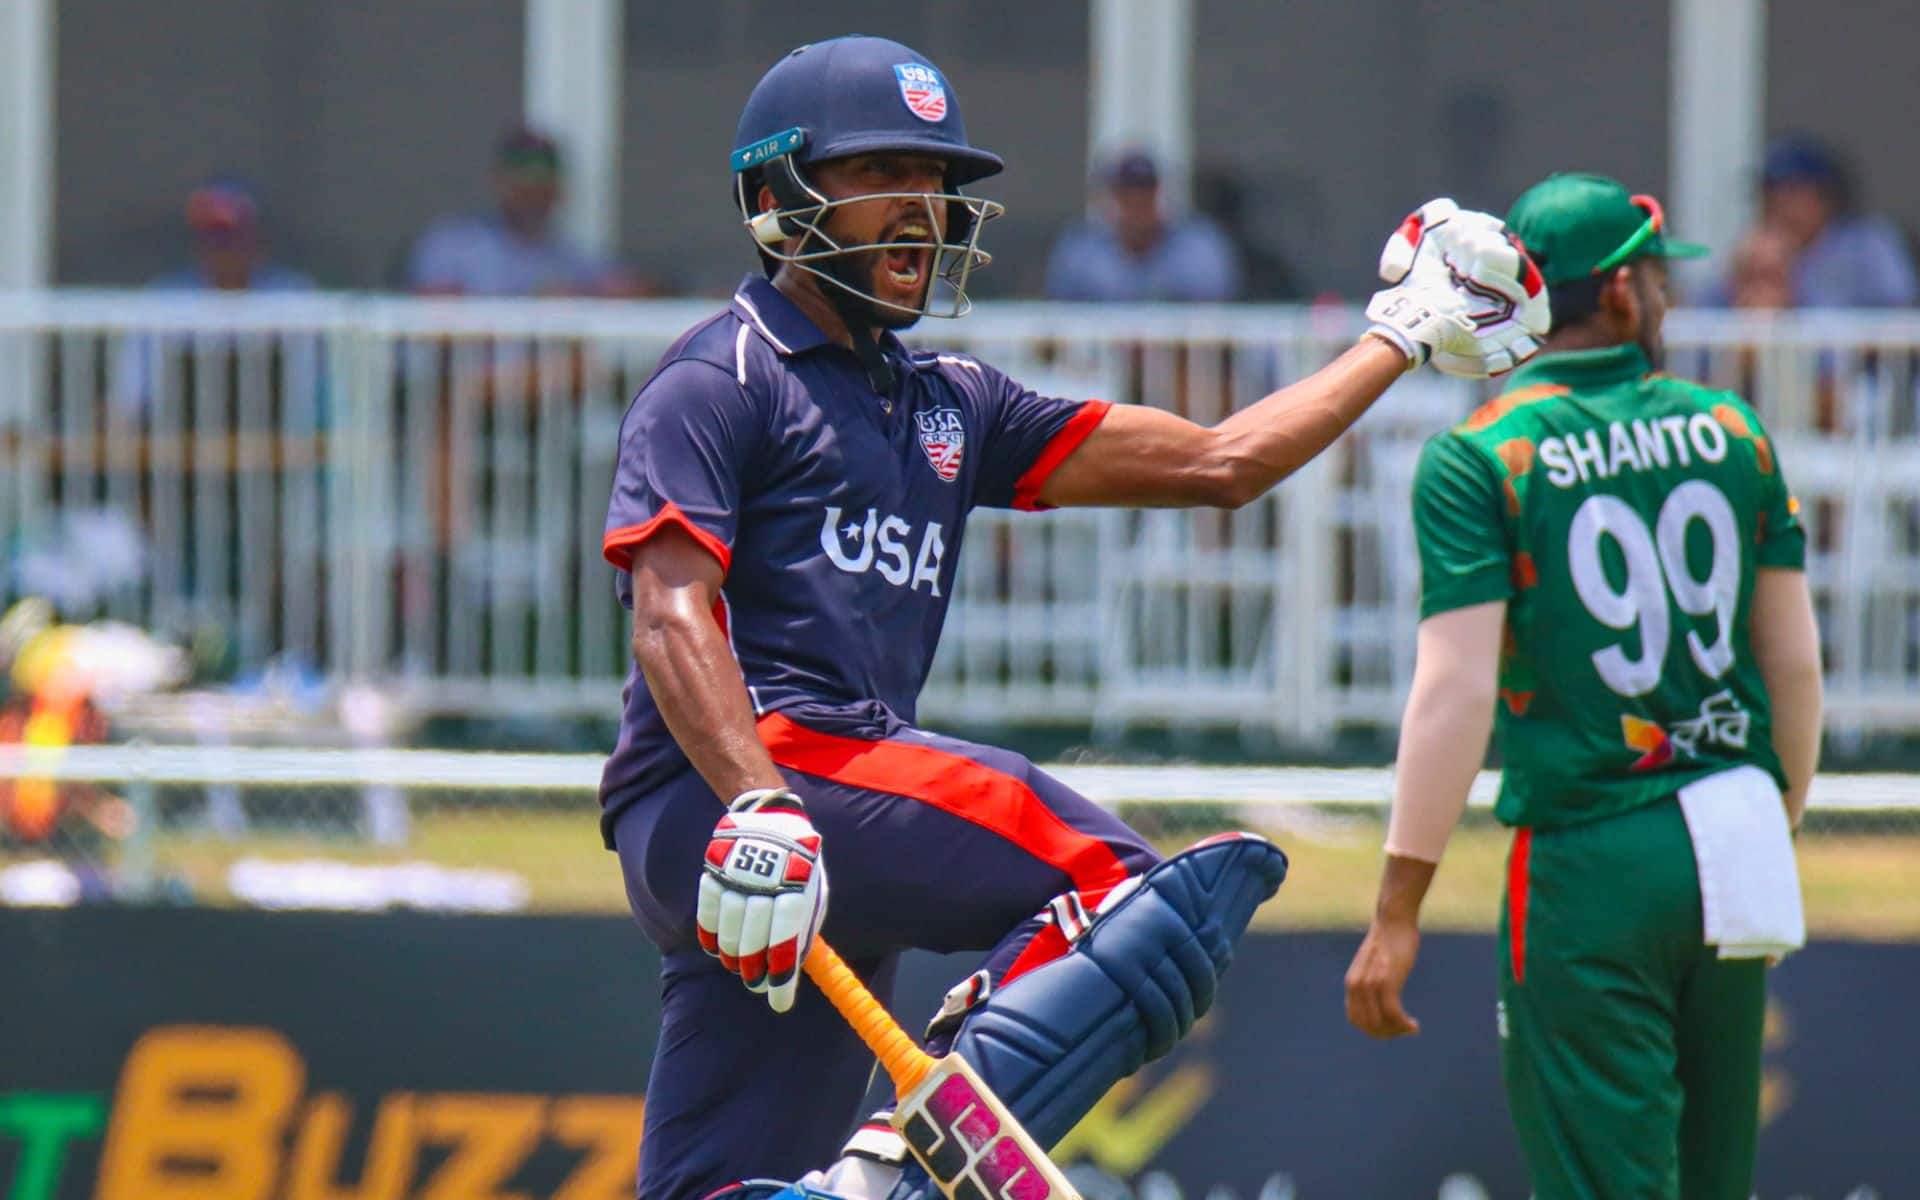 Harmeet Singh played a key role in USA's triumph over BAN (x.com)